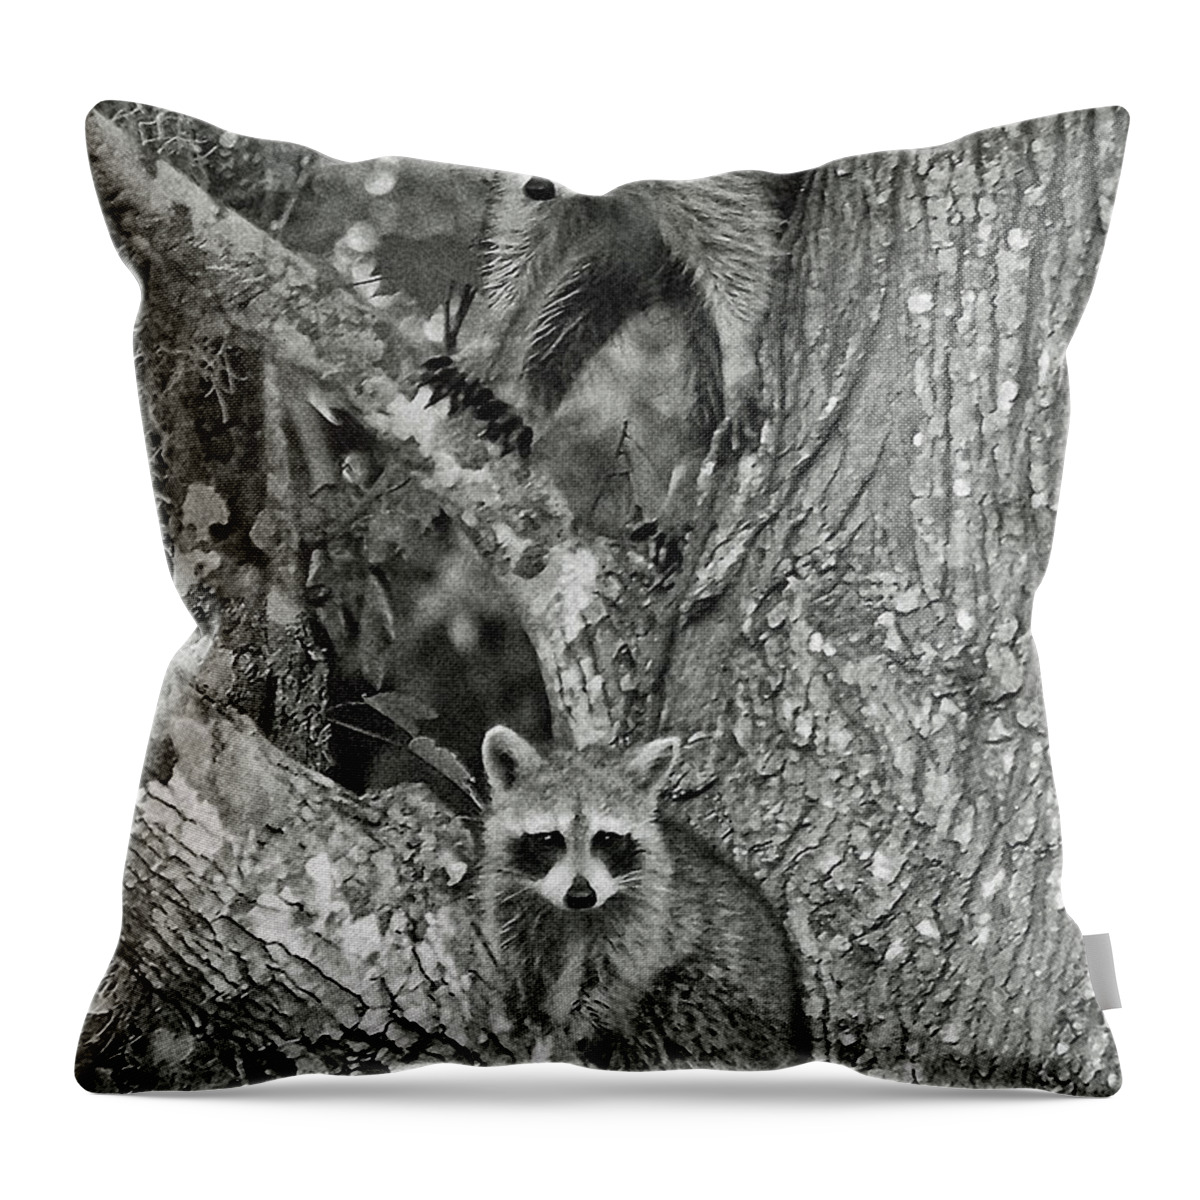 Racoons Throw Pillow featuring the digital art Double Trouble by DigiArt Diaries by Vicky B Fuller